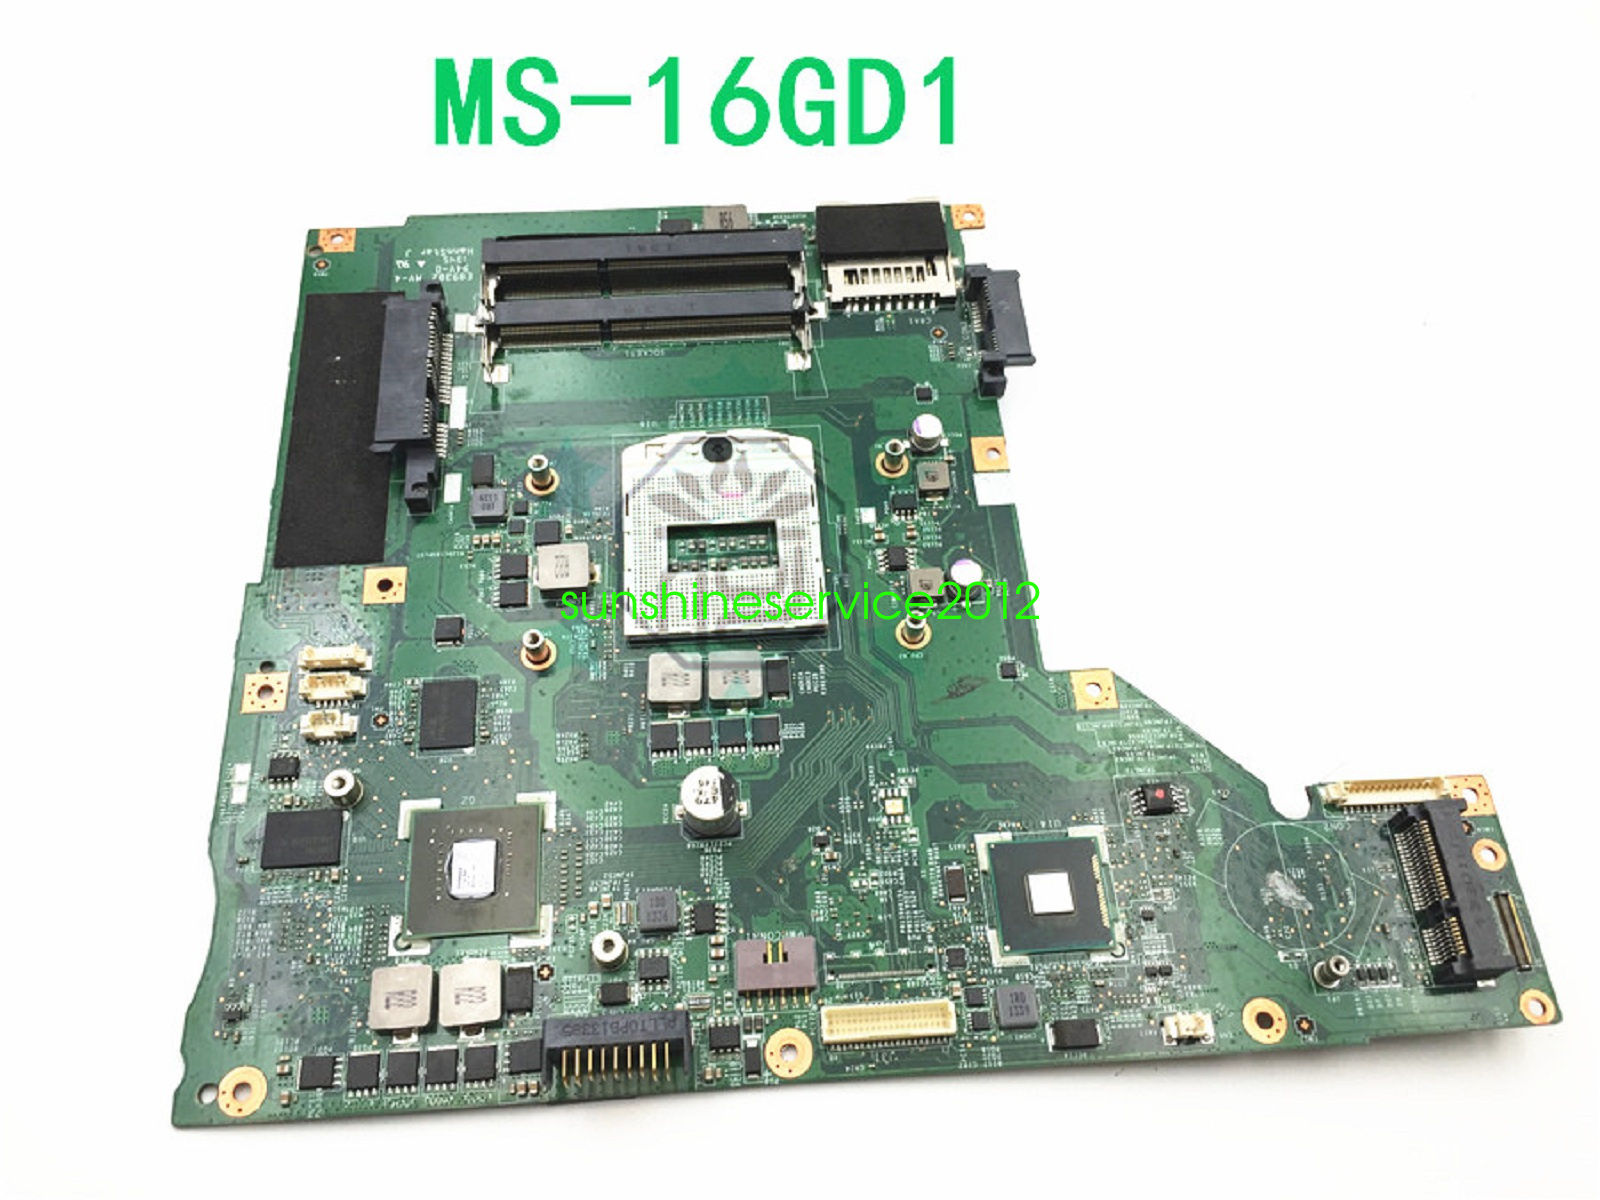 MSI CX61 CX60 Laptop Intel Motherboard MS-16GD1 VER: 1.1 Tested